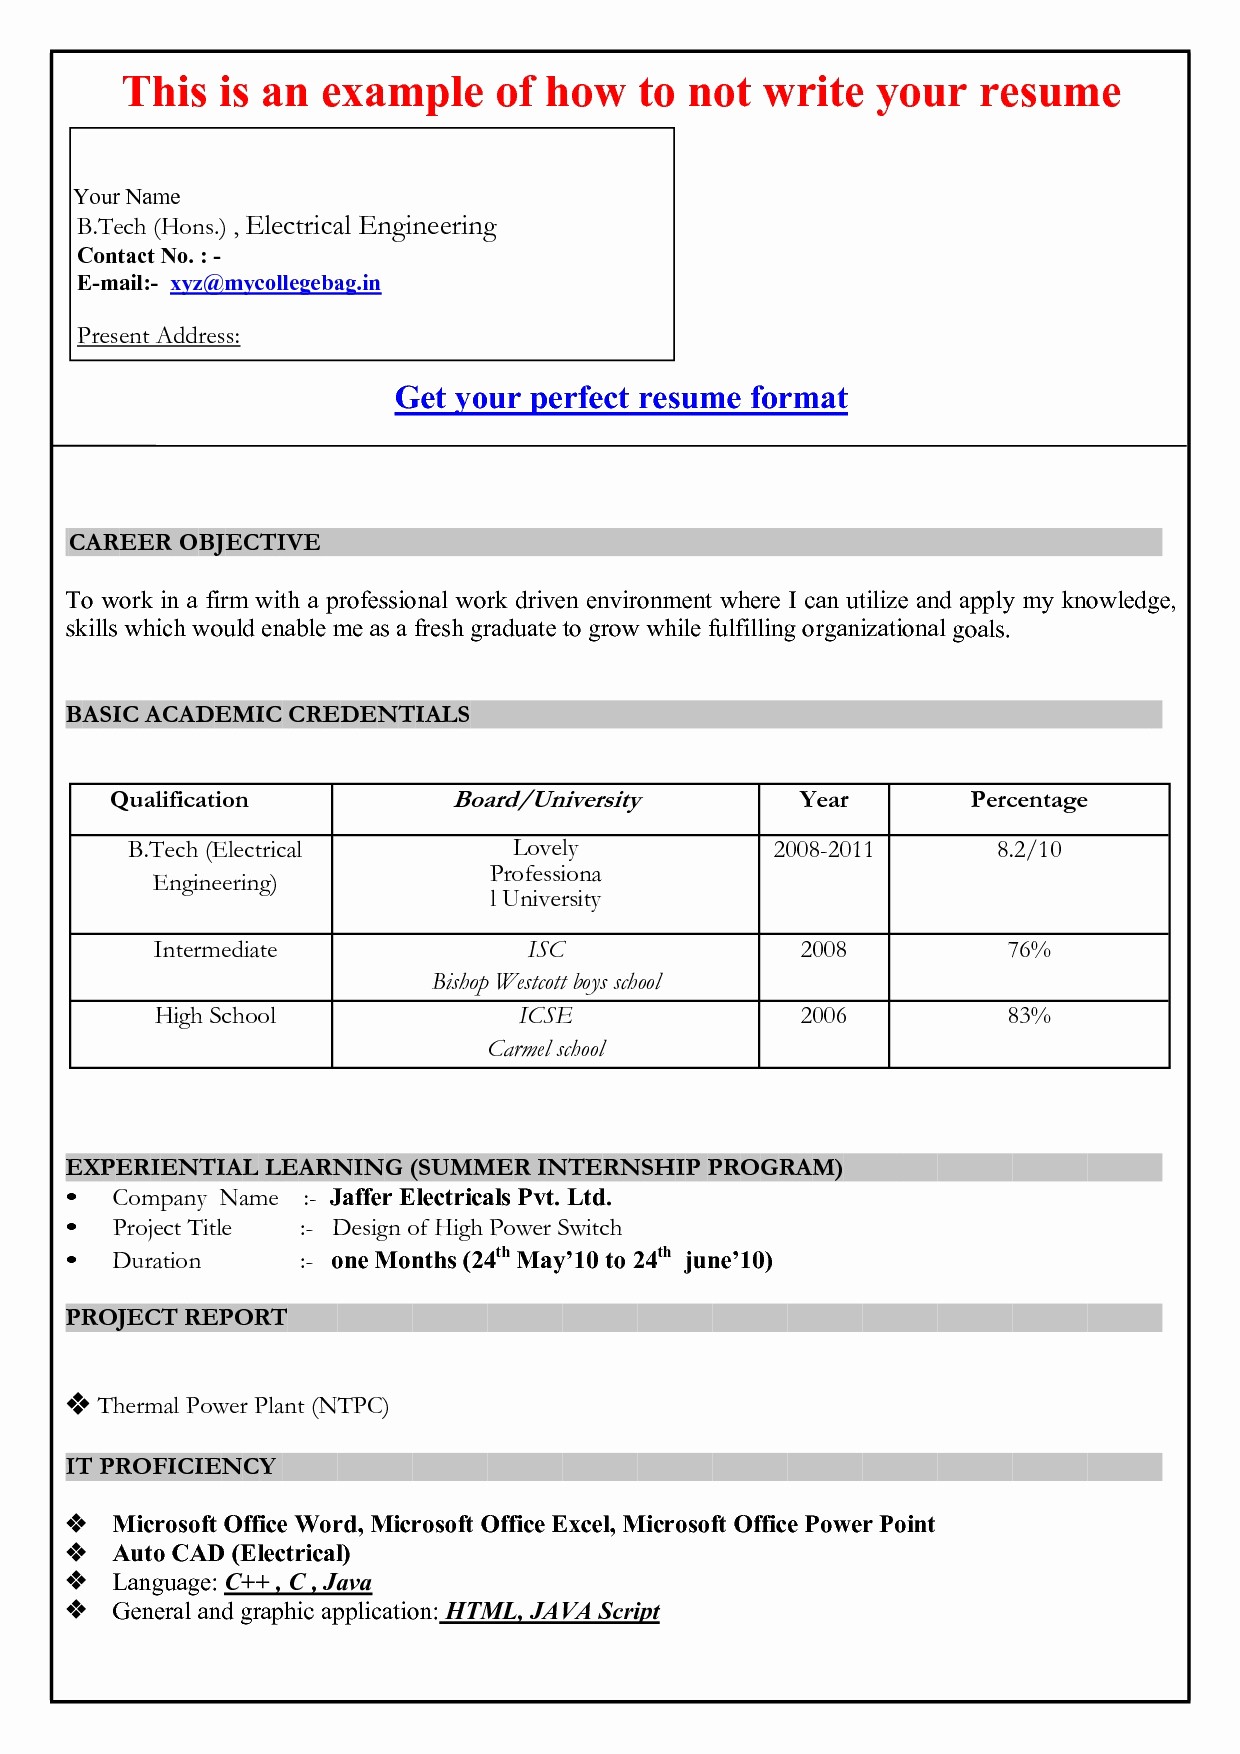 Resume Template On Word 2007 Awesome Download Invoice Template Word 2007